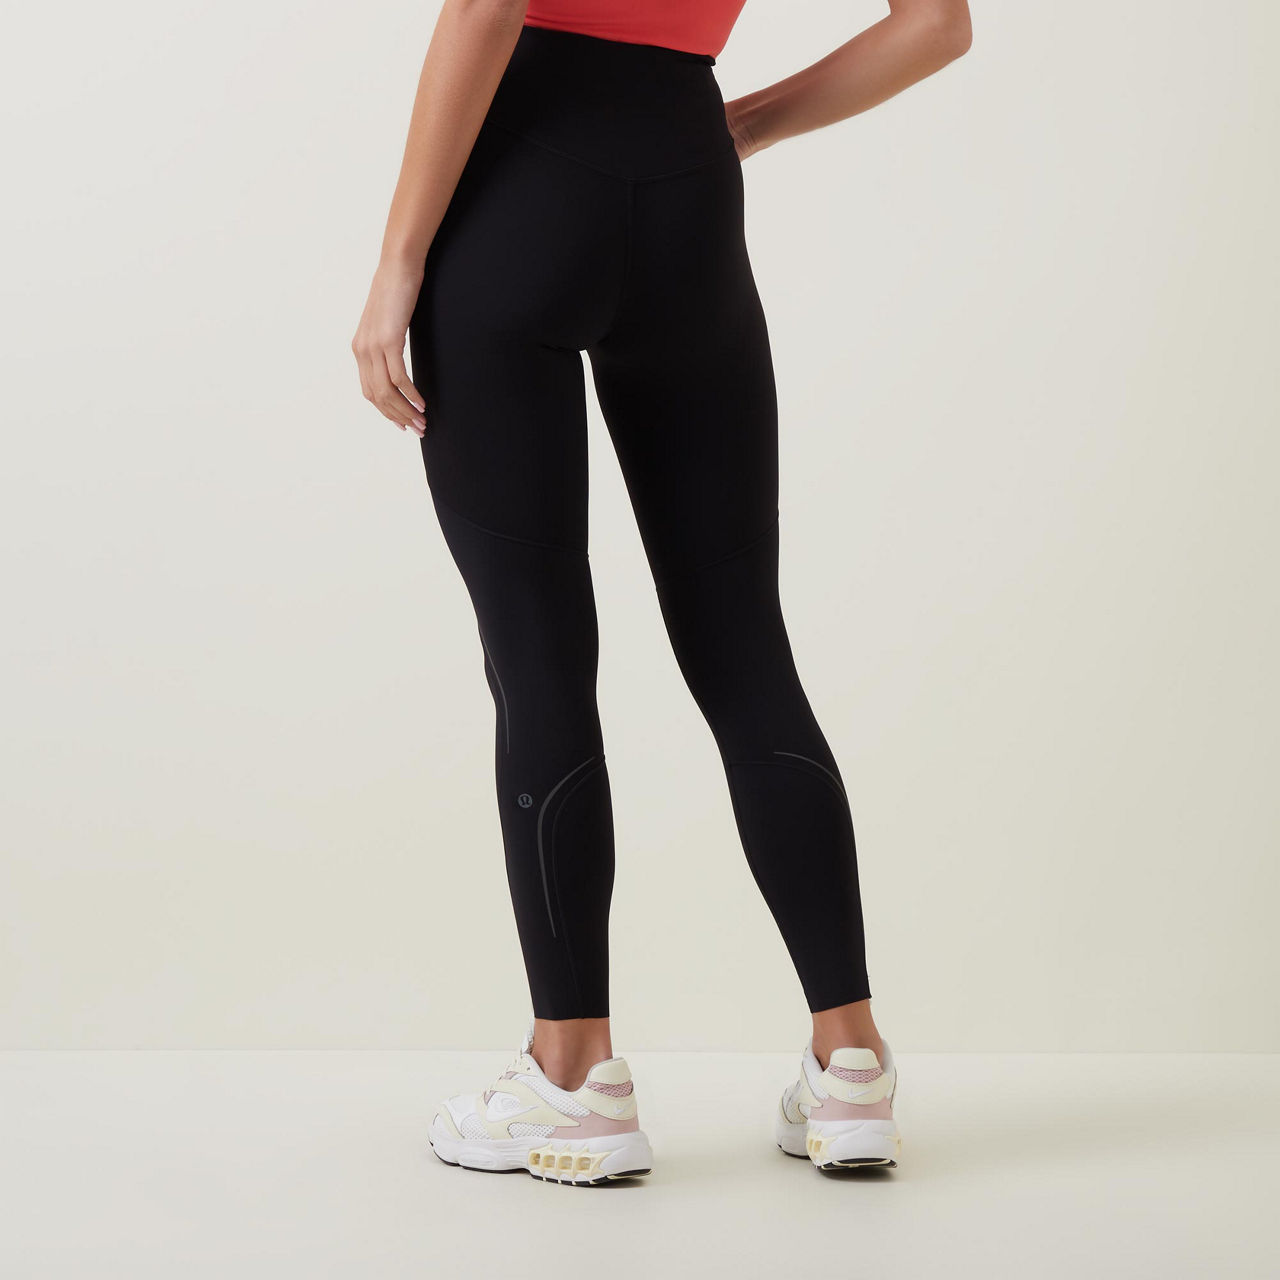 Base Pace High-Rise Running Tights 25